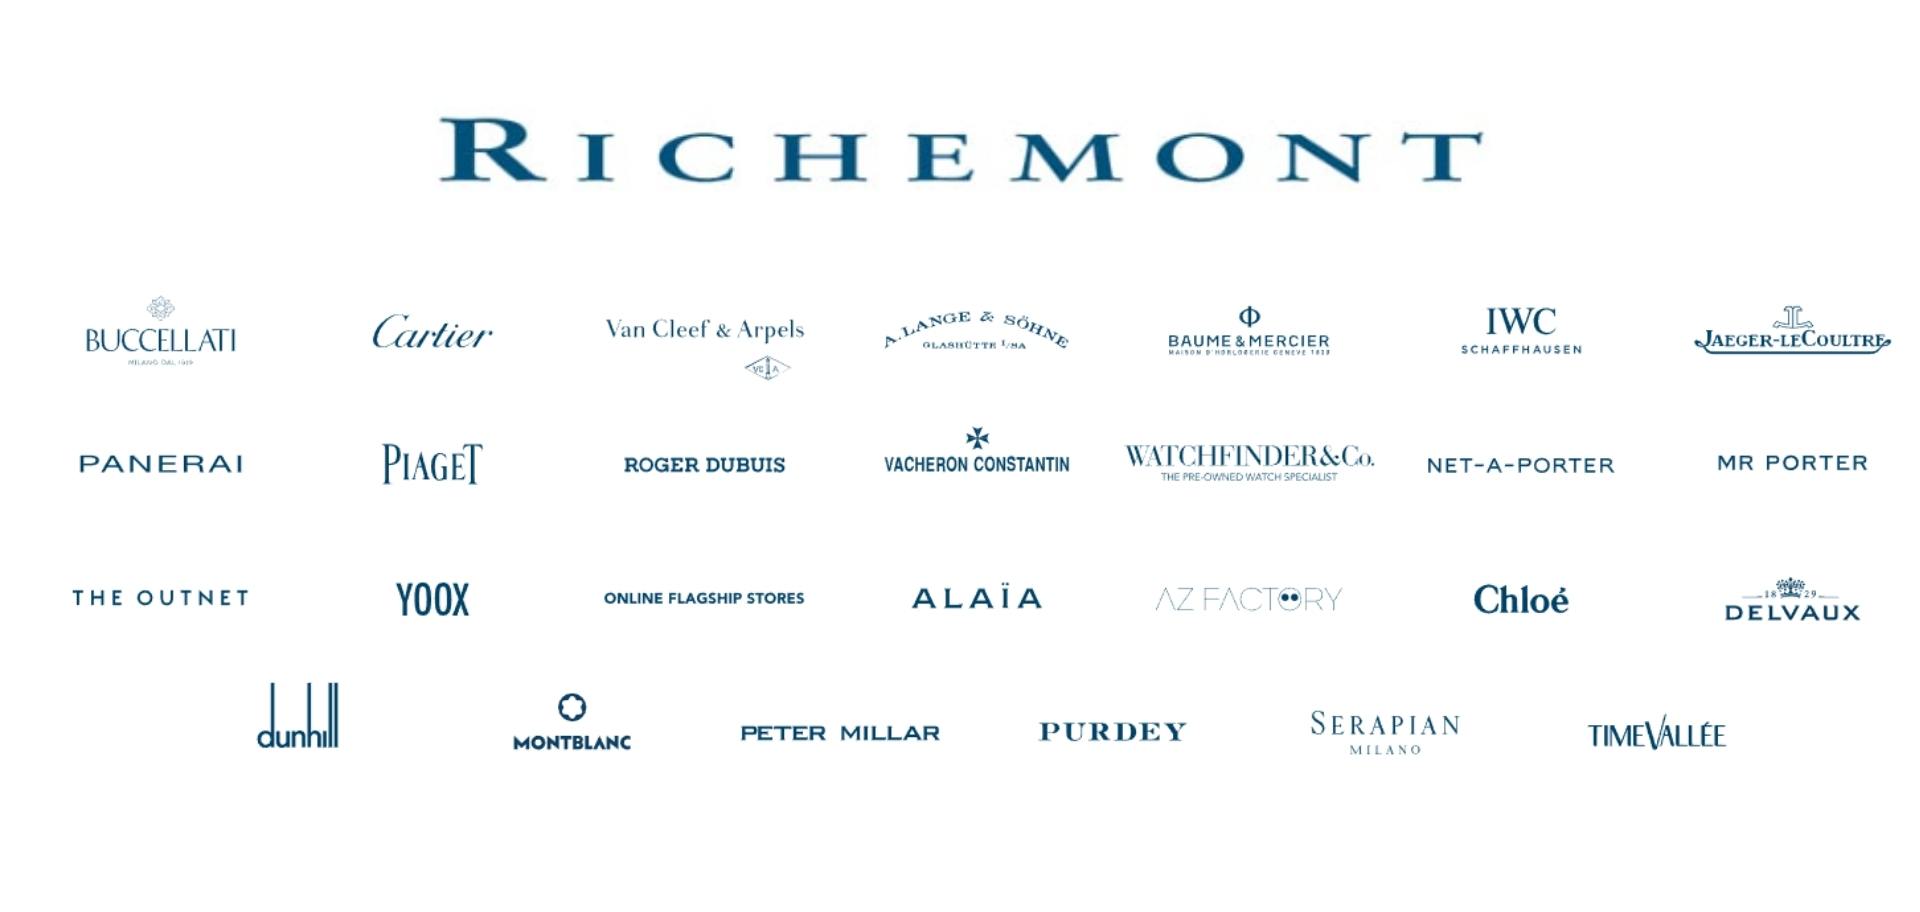 The Rich Brand Story of Richemont Group